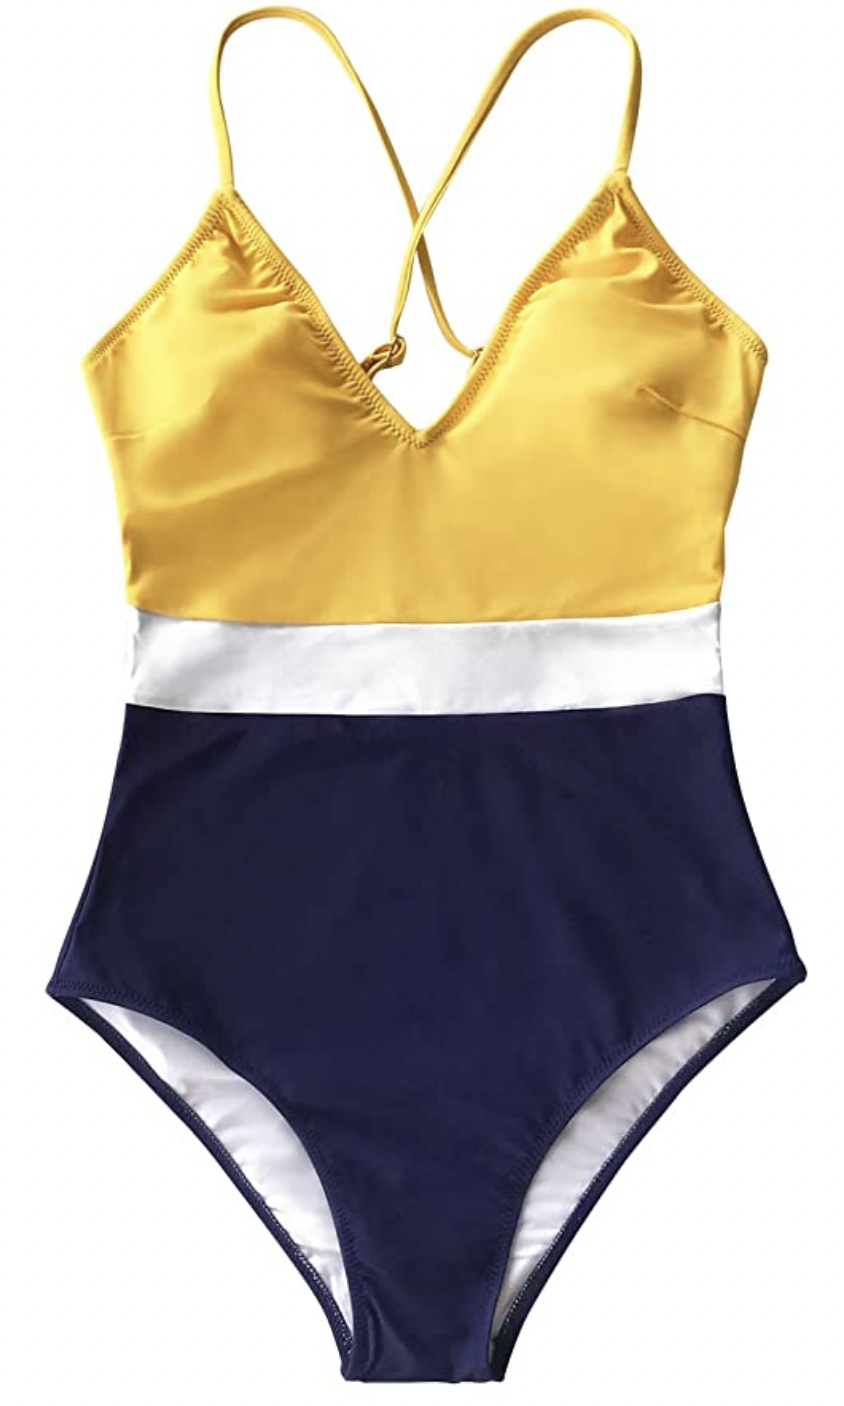 Awesome Bathing Suits and Coverups You Can Buy Online - The Harper Girls